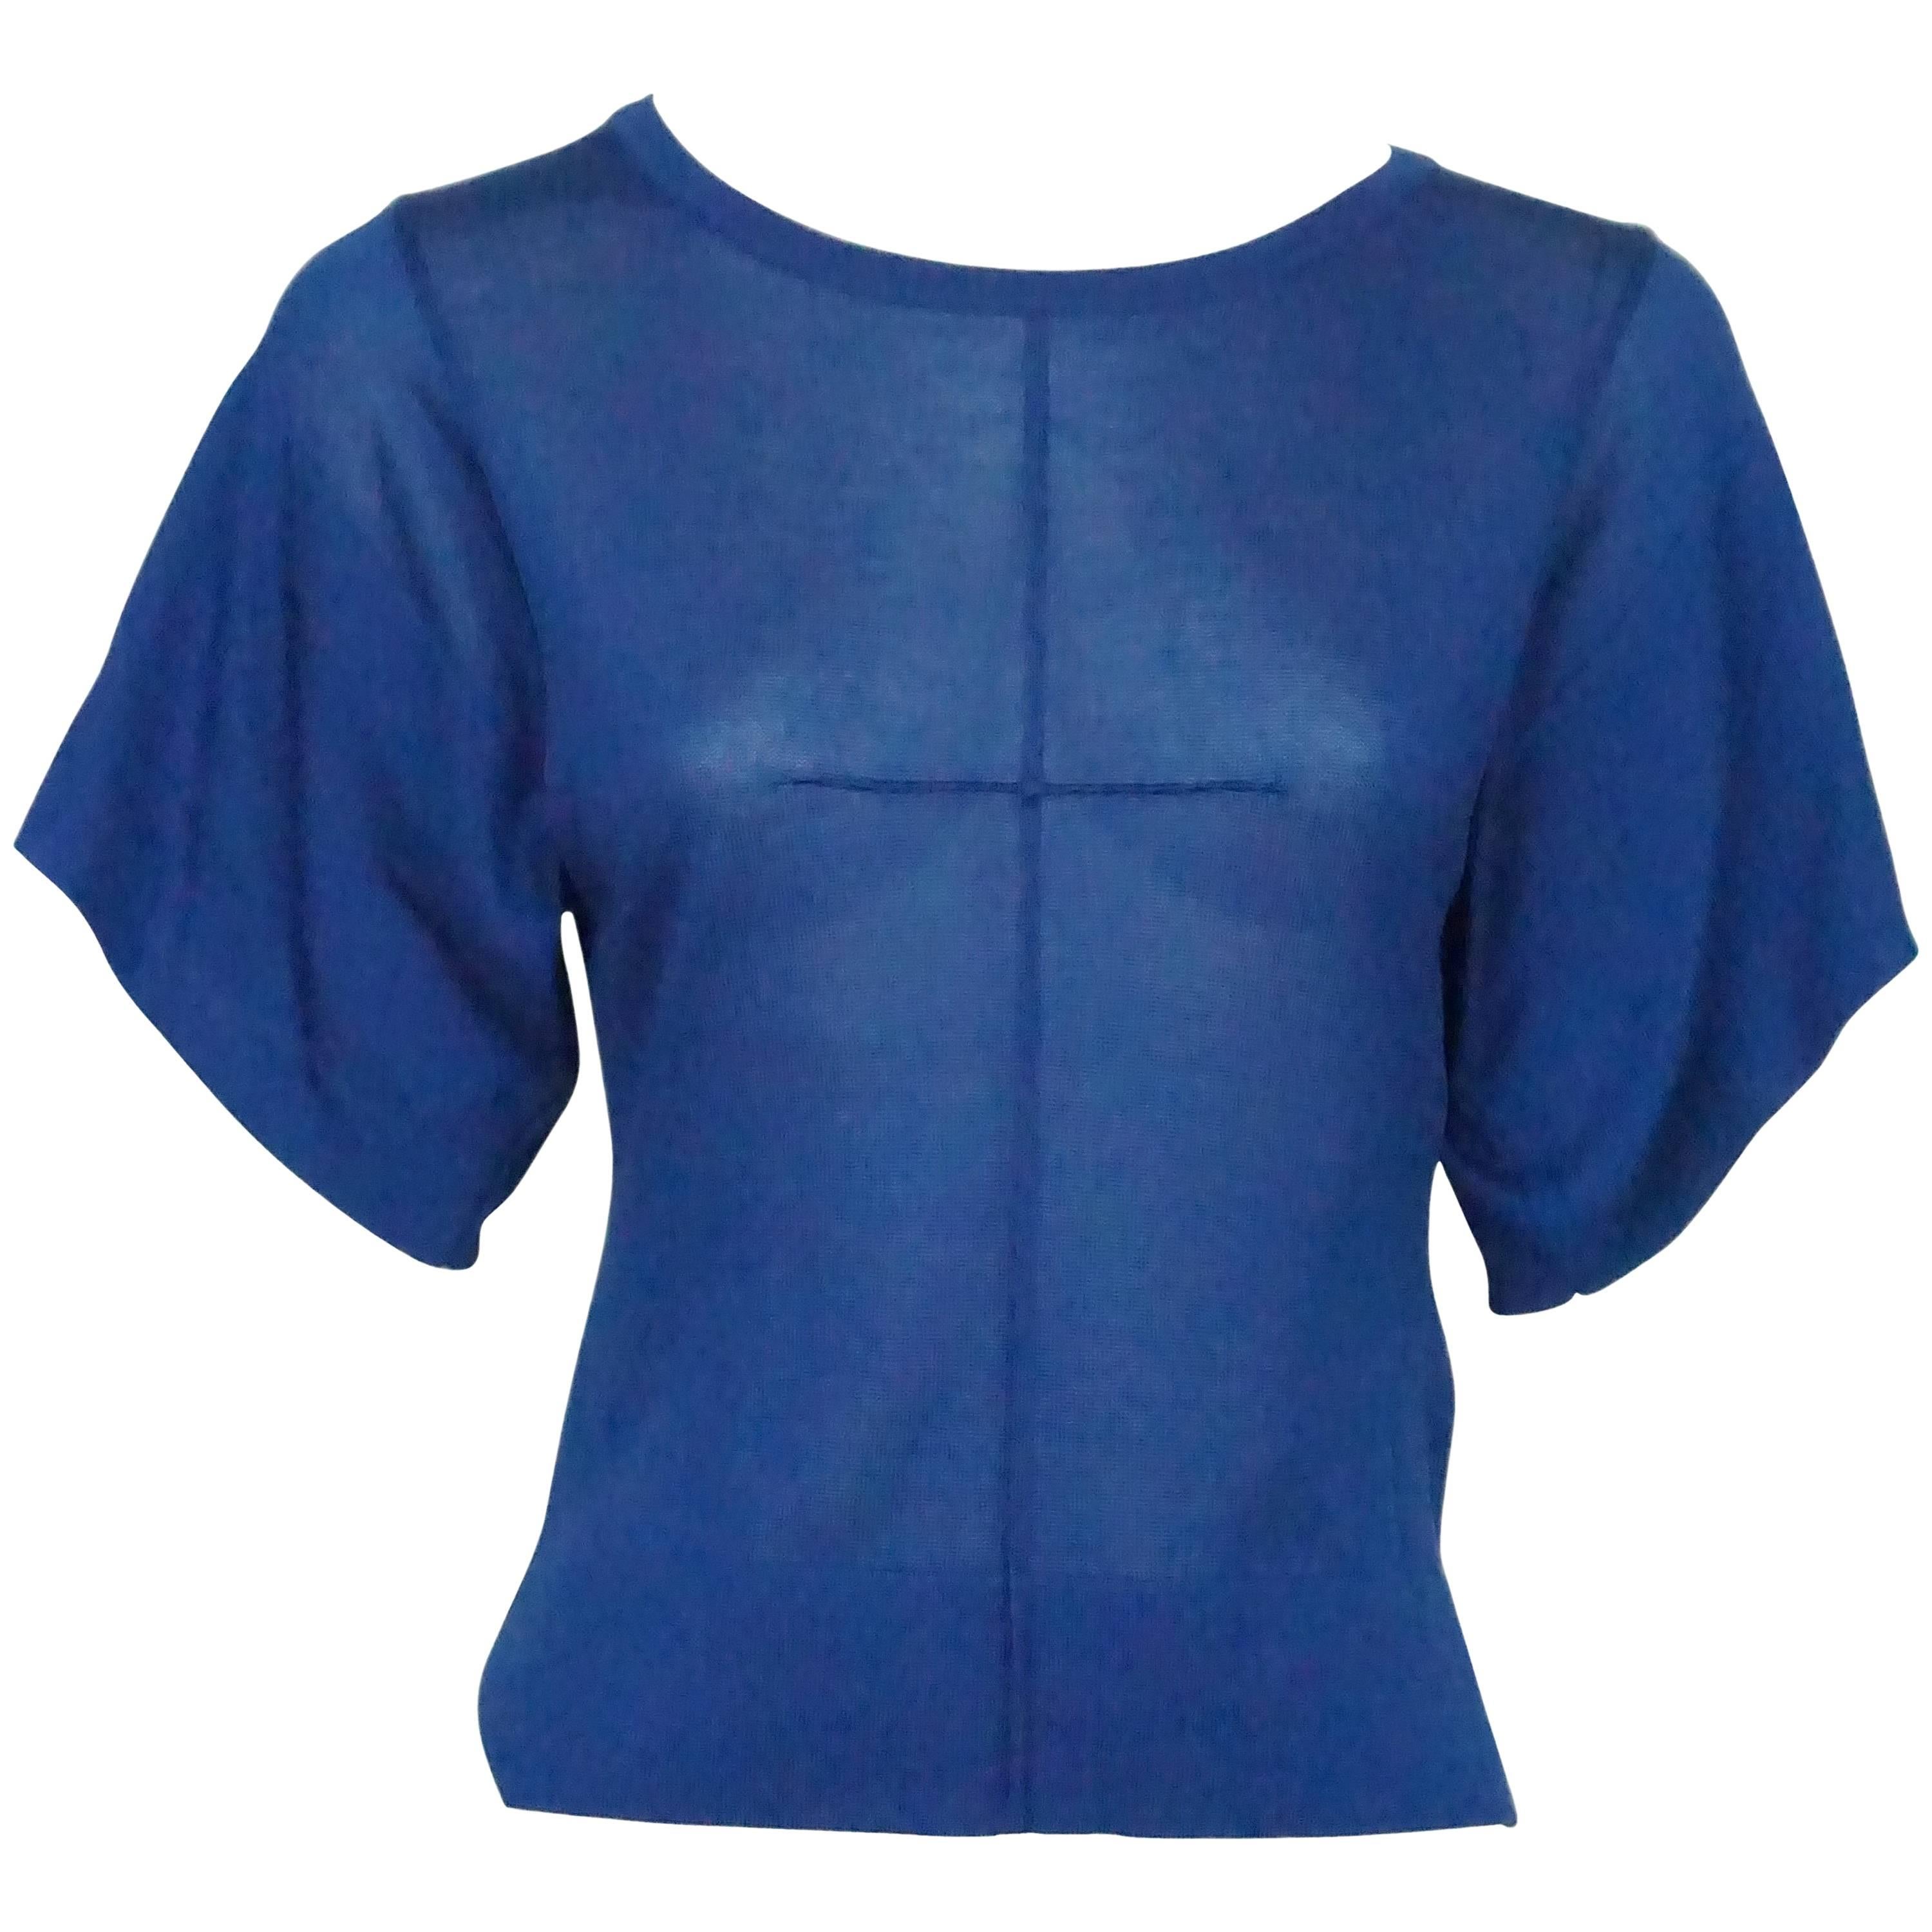 Emilio Pucci Royal Blue Silk Knit Top - XS - NWT For Sale